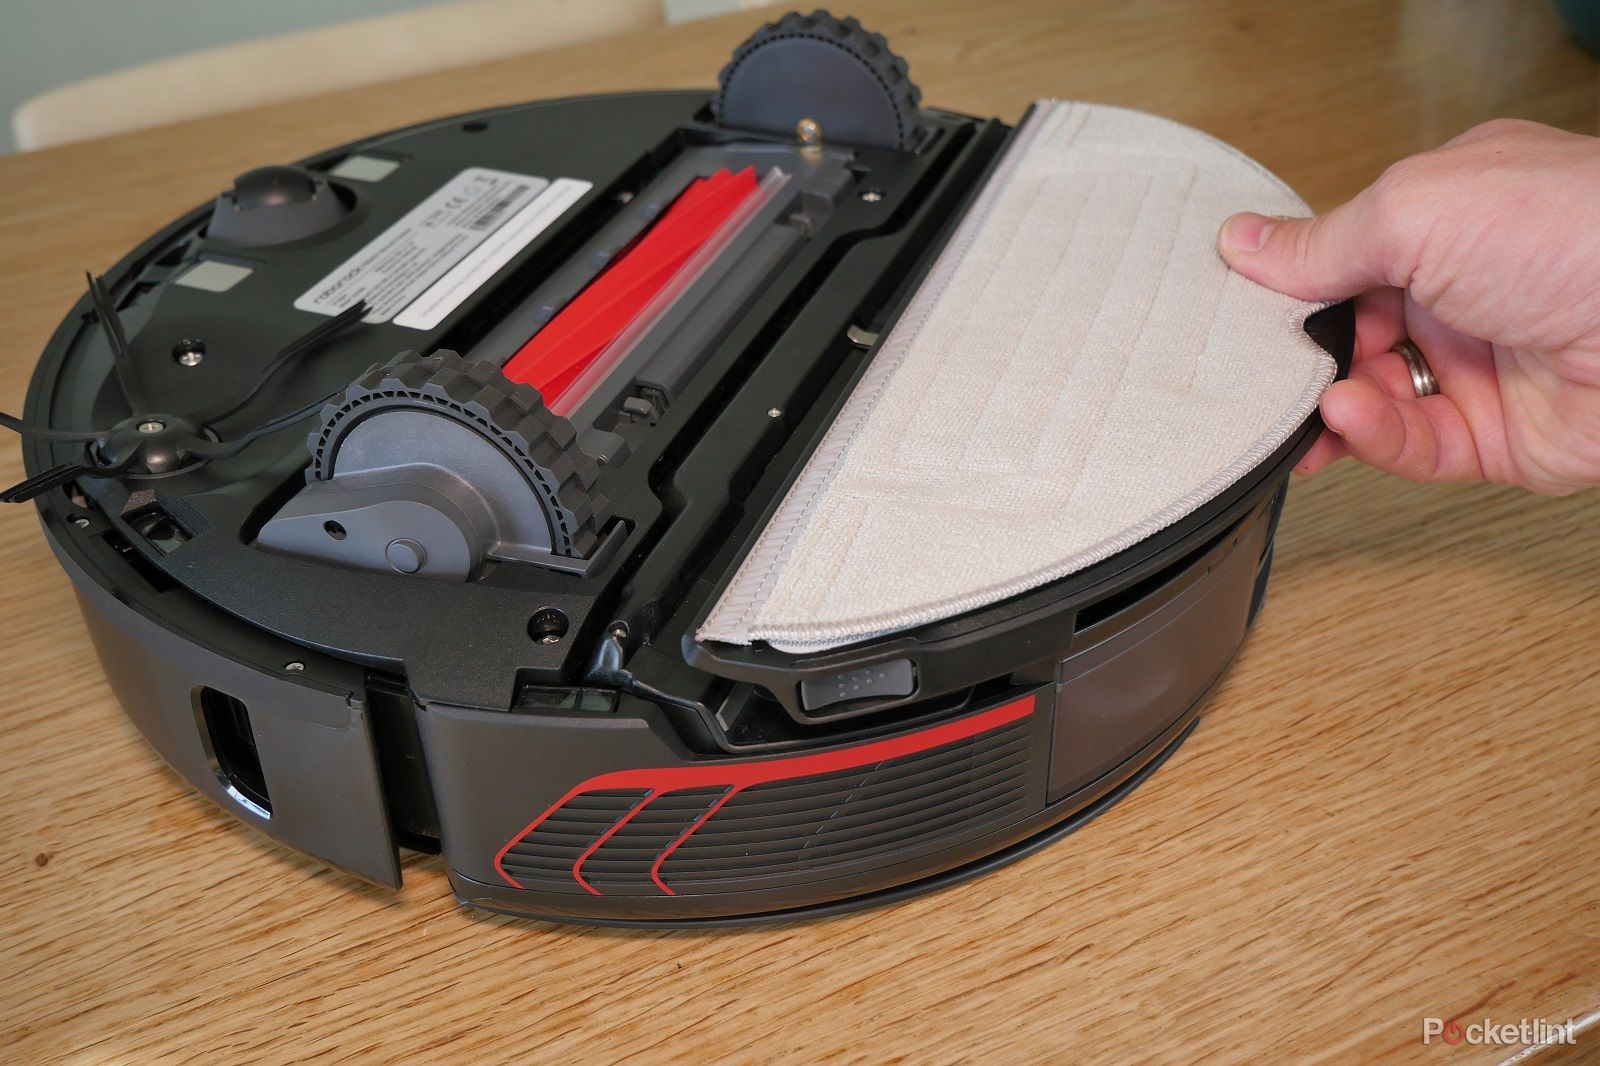 Roborock S7 MaxV Ultra review: A vacuum and mop that cleans after itself so  you don't have to